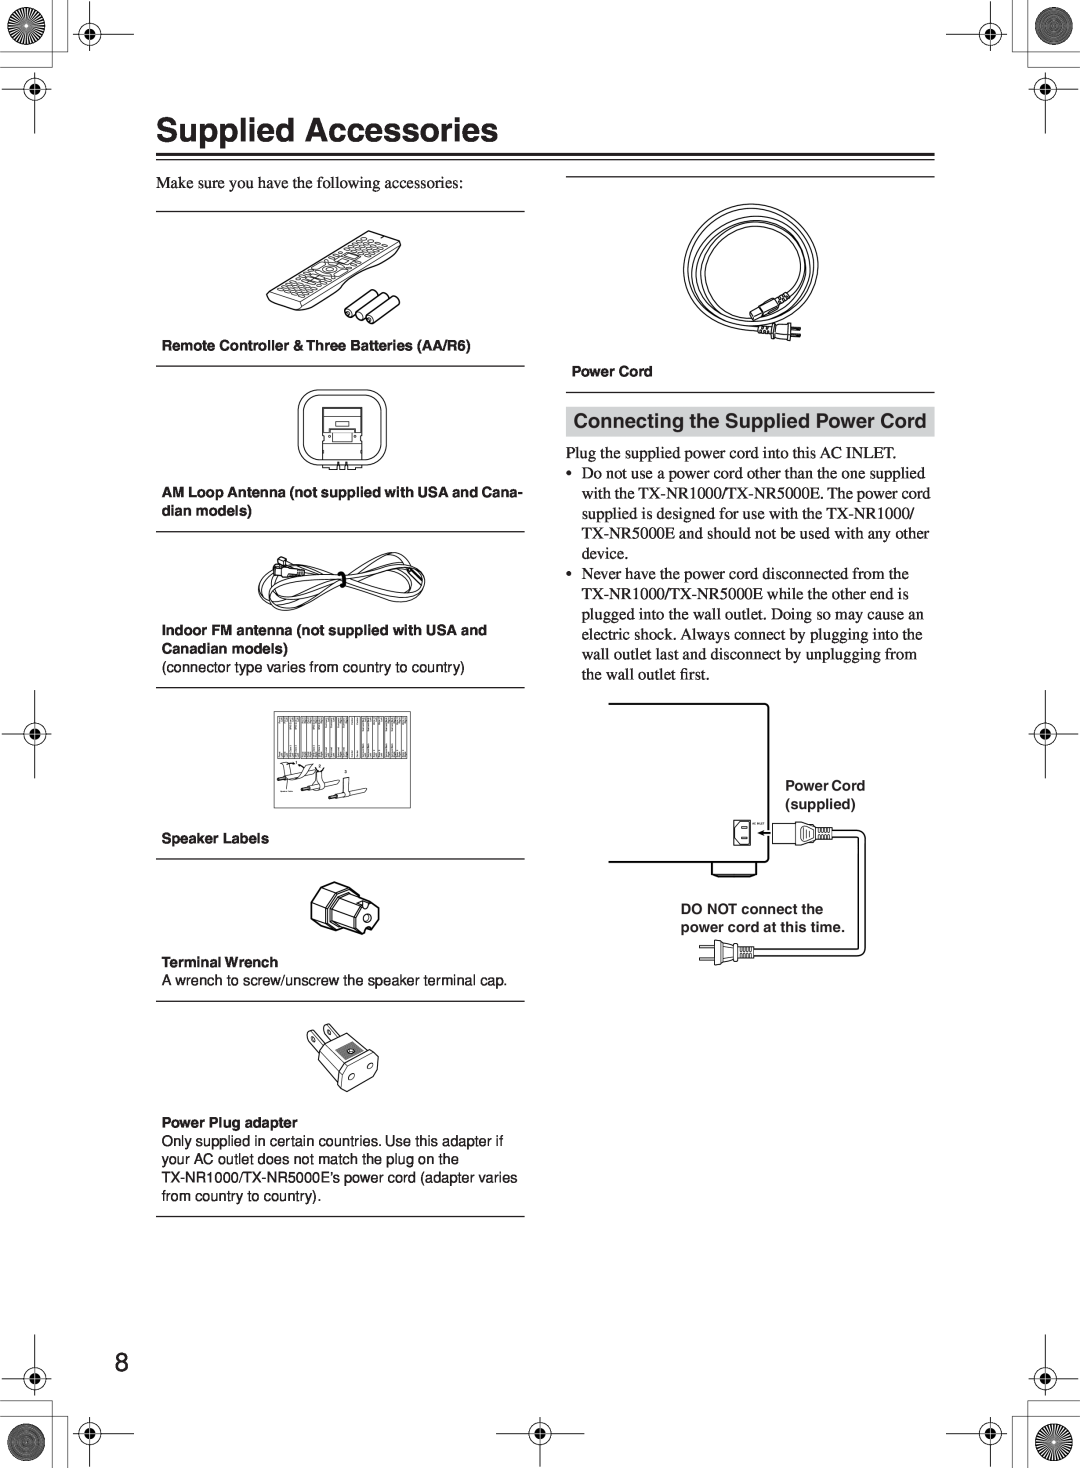 Onkyo TX-NR1000 instruction manual Supplied Accessories, Connecting the Supplied Power Cord 